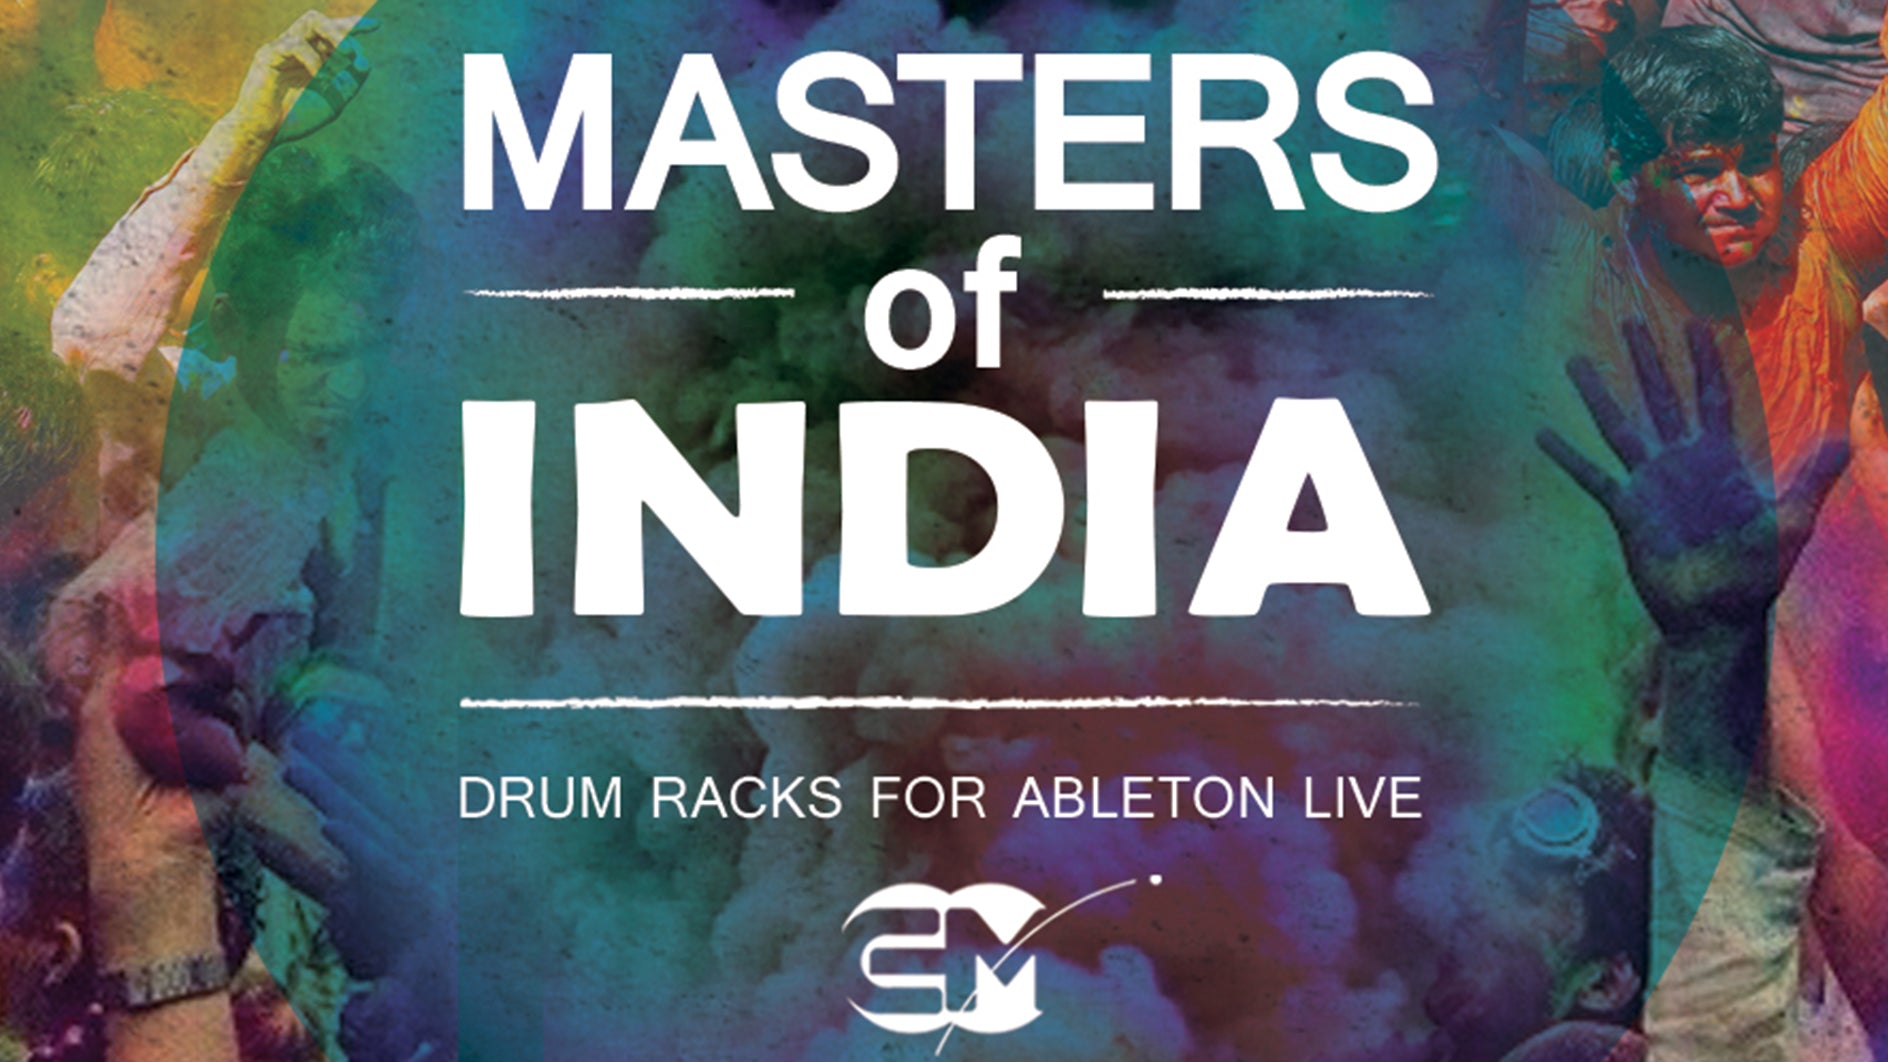 Masters Of India - Drum Racks For Ableton Live